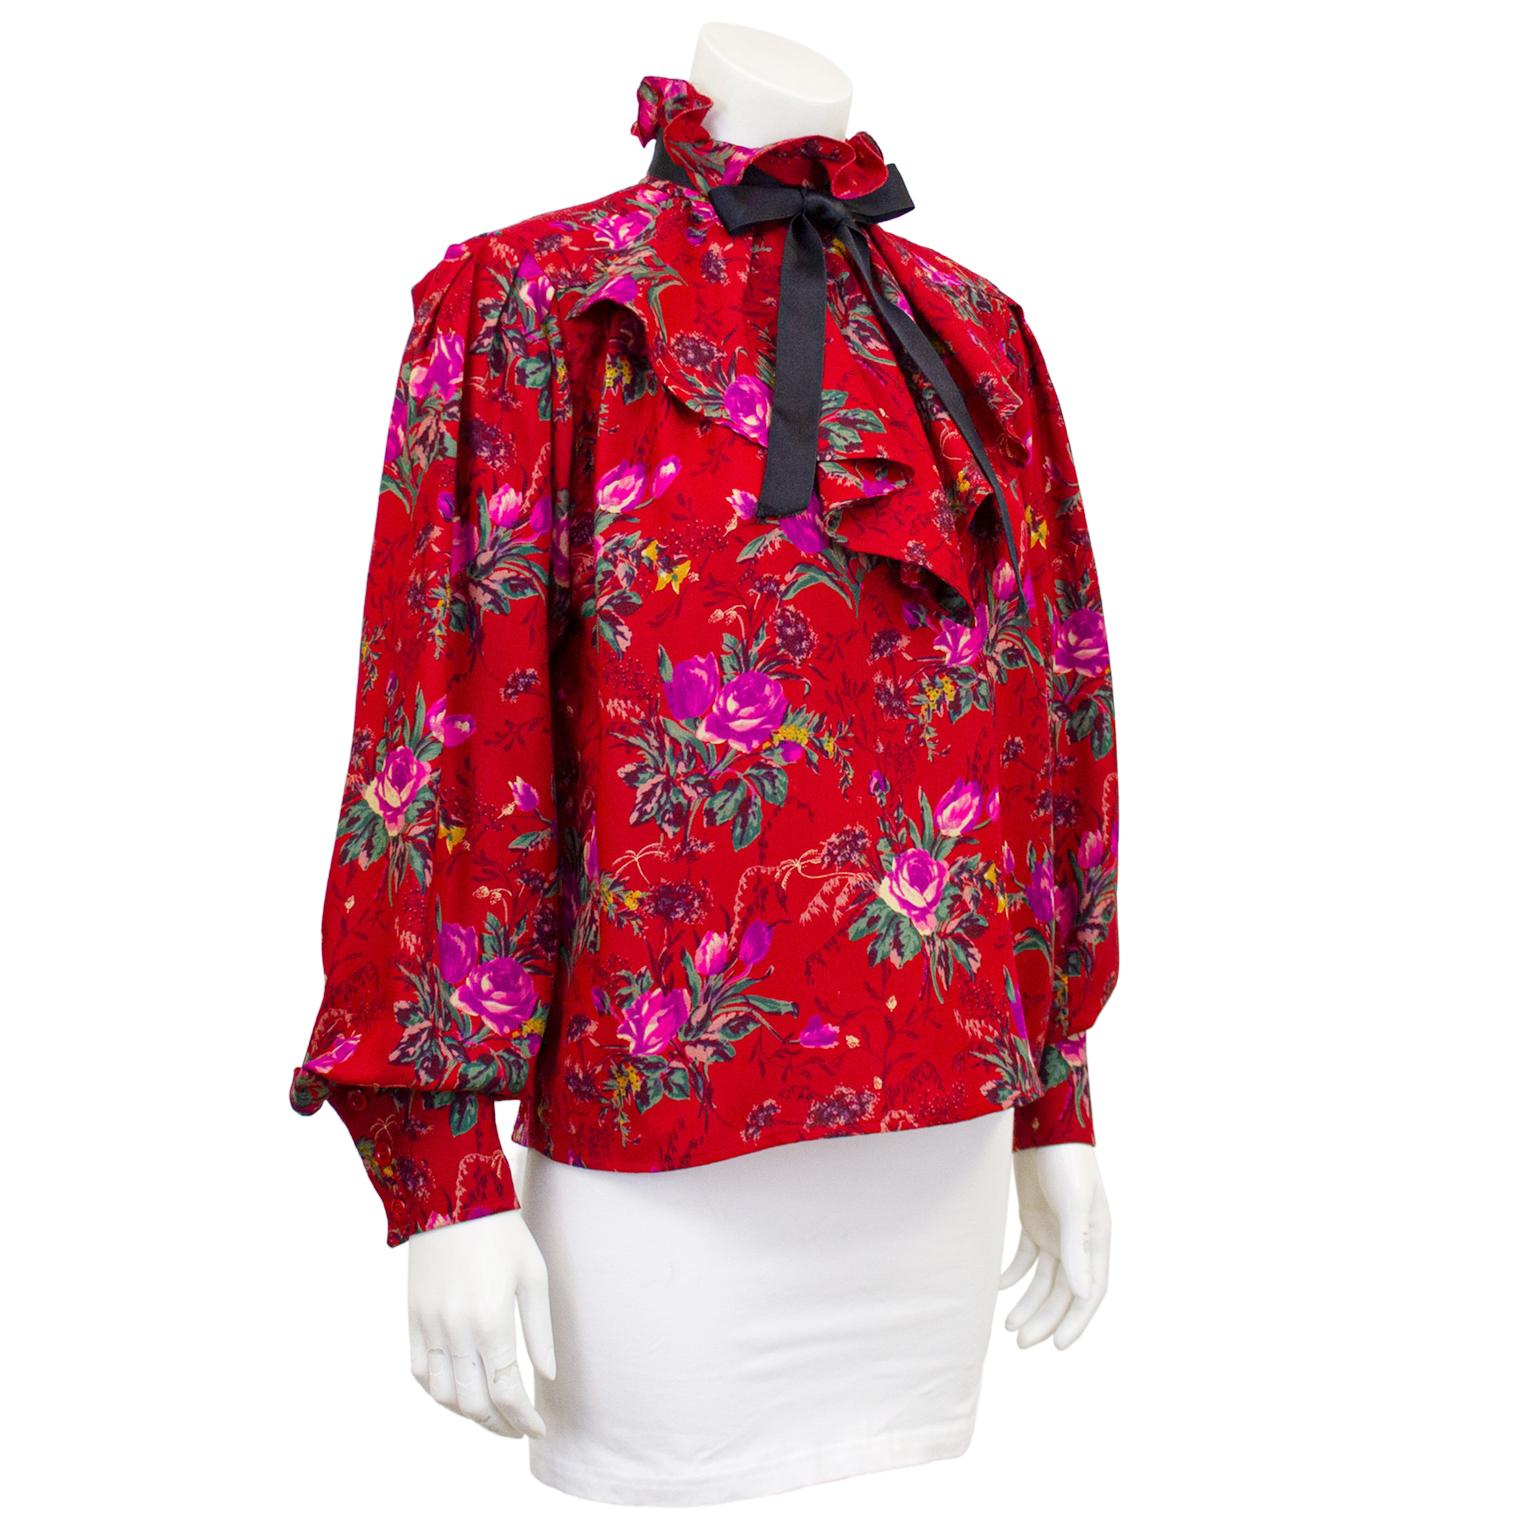 Emanuel Ungaro 1980's red wool floral shirt with ruffle collar and cascading jabot ruffle, finished with a black satin tie ribbon at the neck. Gathering below the shoulder. Cuff is cavalier style with French button fastening. The shirt buttons up